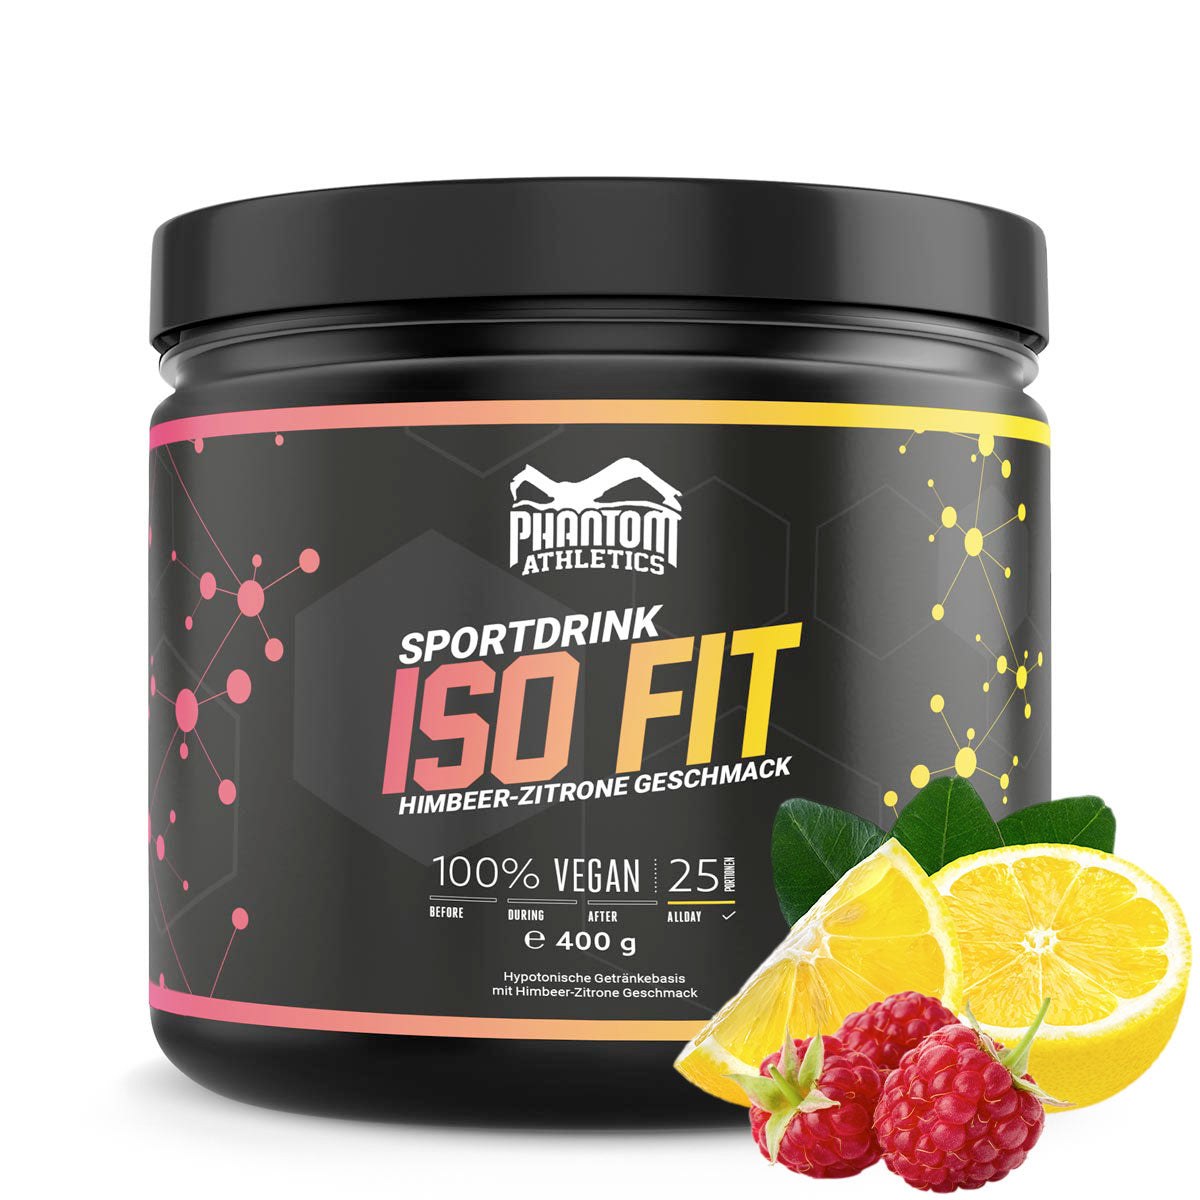 The Phantom ISO FIT nutritional supplement provides you with everything you need for martial arts training. Now with a delicious raspberry-lemon flavor.